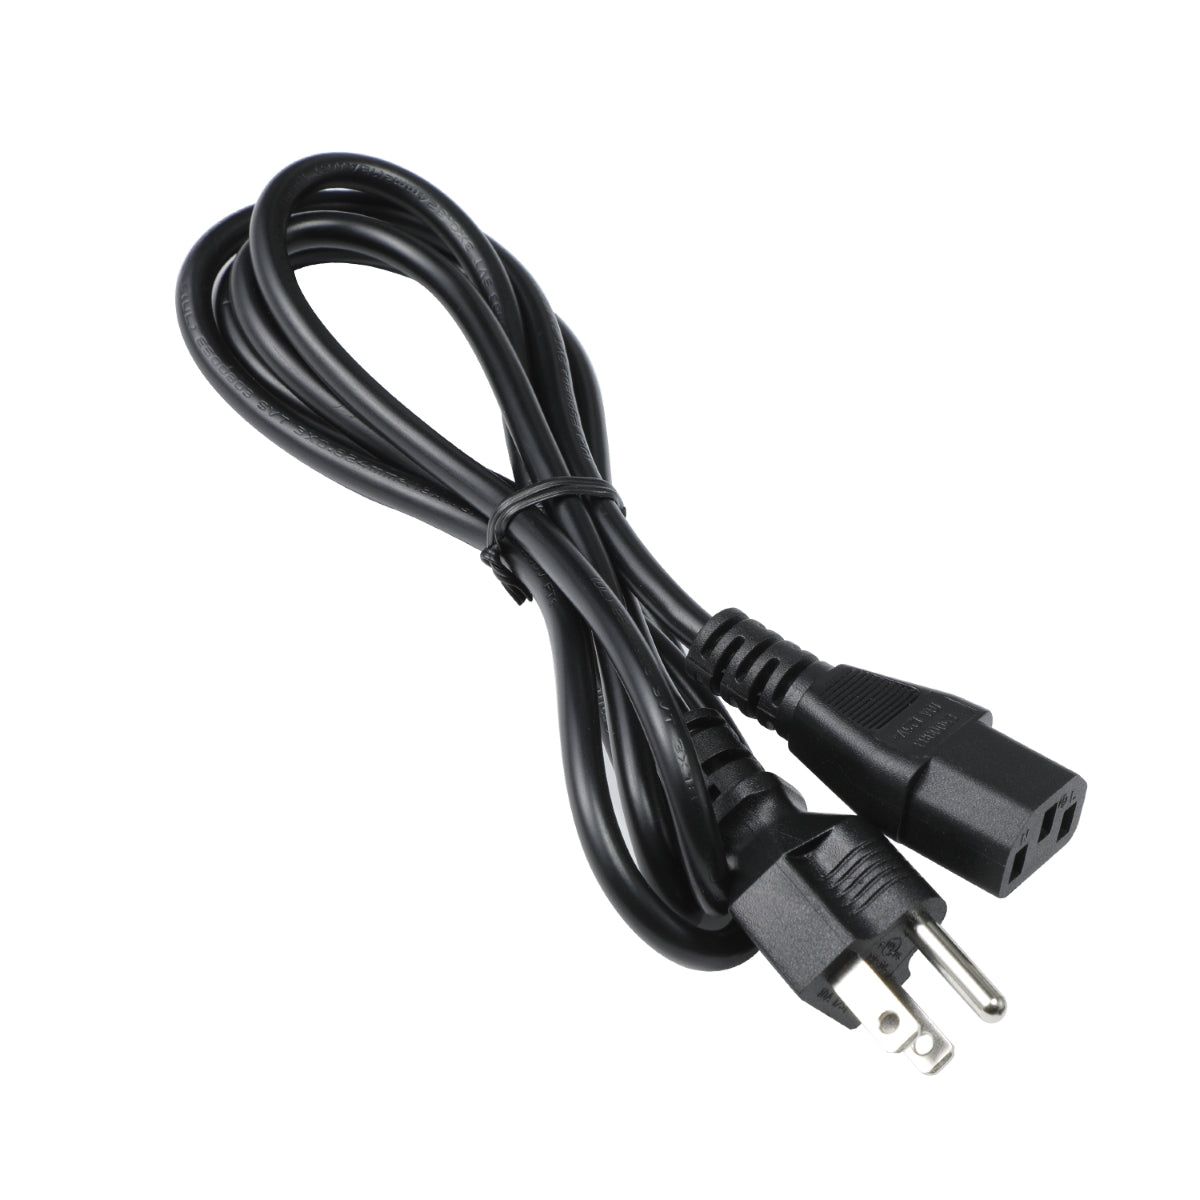 Power Cord for HP Pavilion 550-110 Computer.